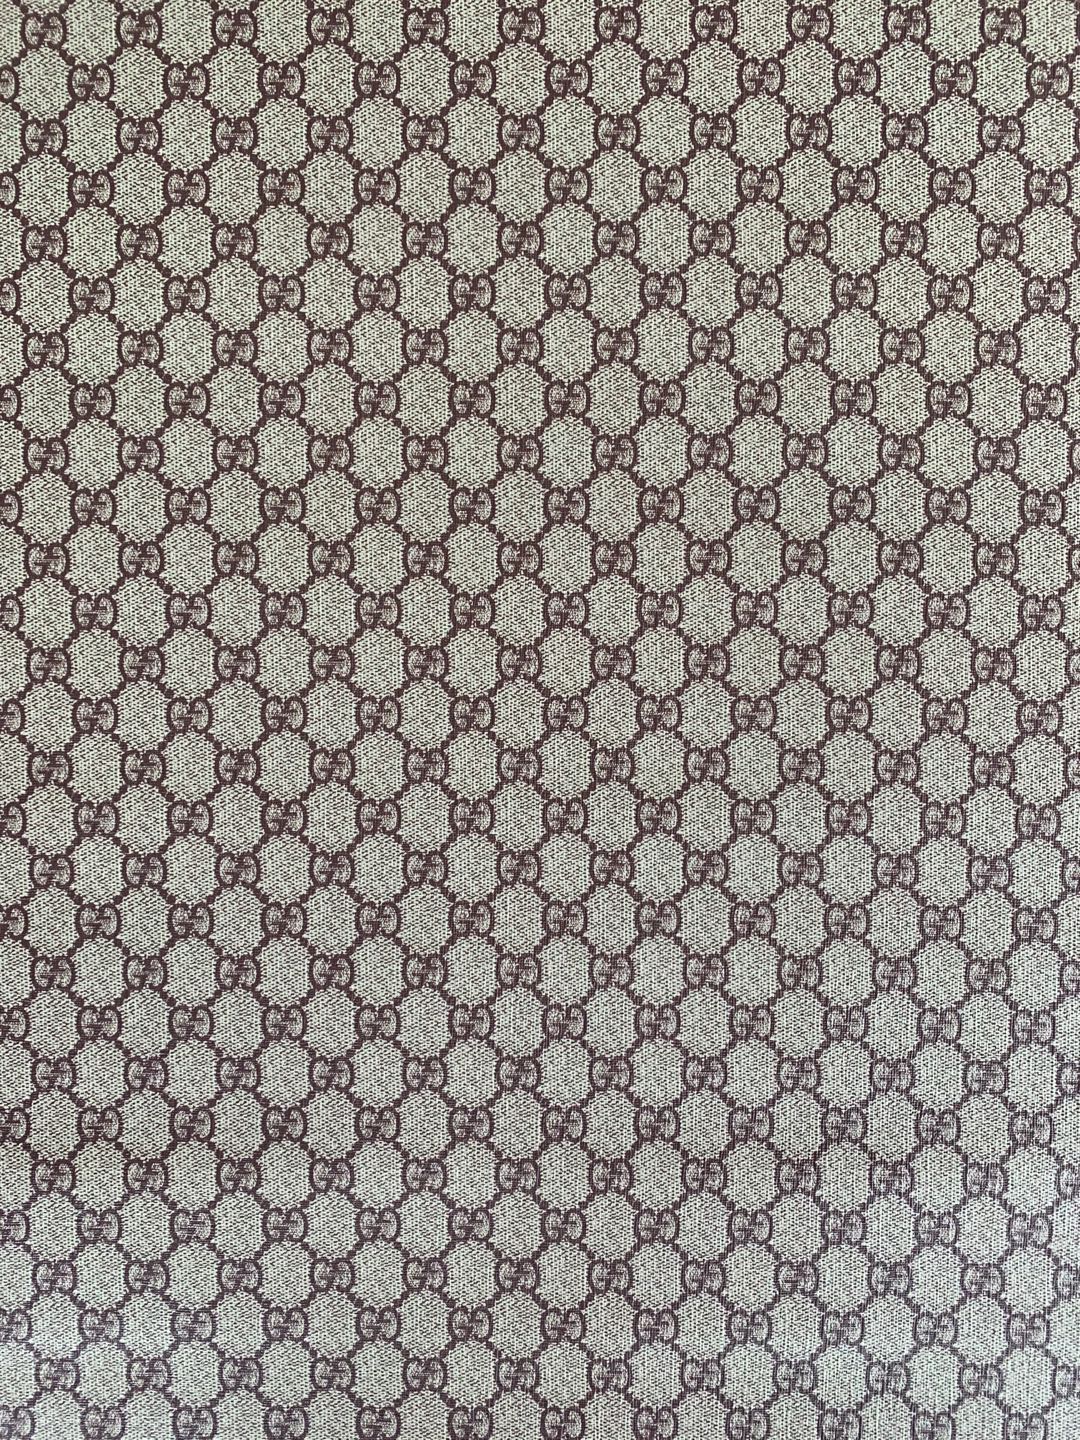 Gucci Beige Leather Fabric, Brown/Beige vinyl fabric by the yard